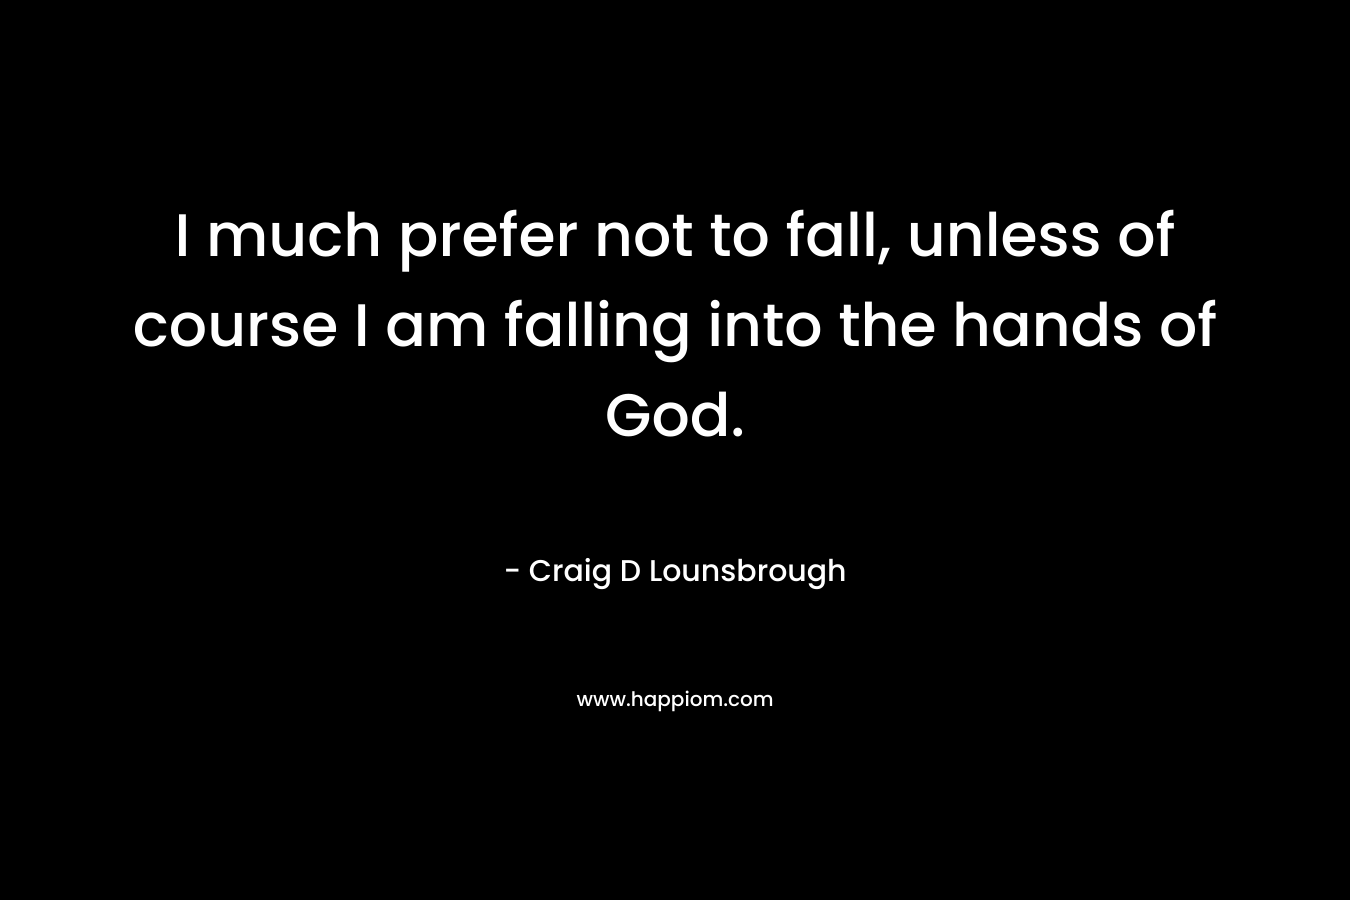 I much prefer not to fall, unless of course I am falling into the hands of God.